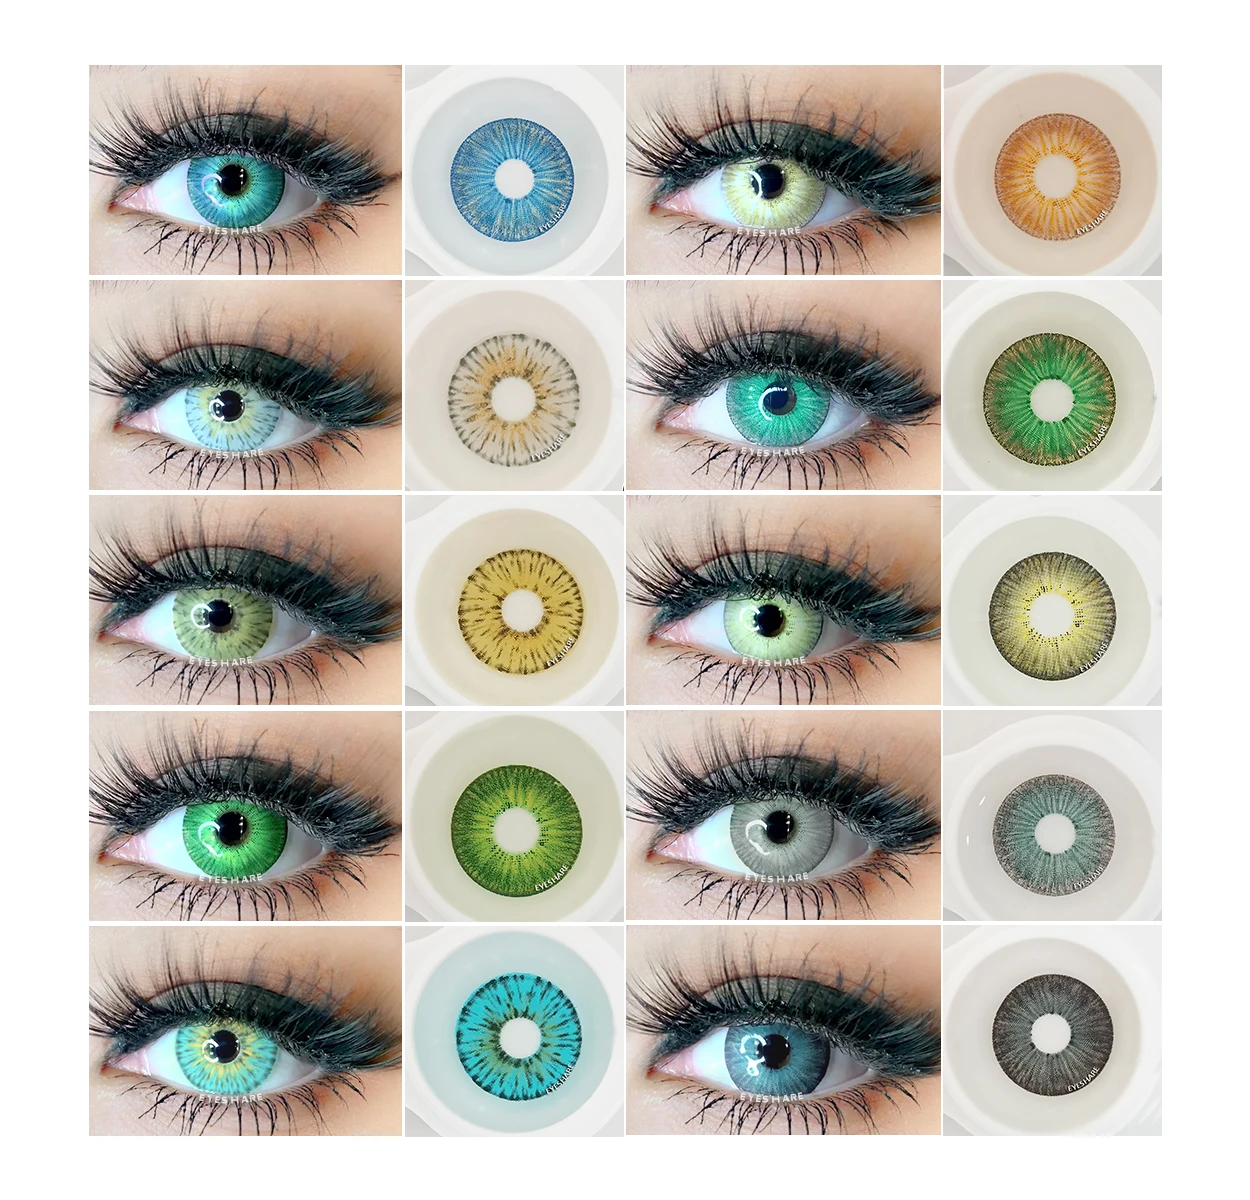 

EYESHARE 1 Pair NEW Fashion Lenses New York Color Soft Big Eye Cosplay Contact Lenses for Eyes acuvue oasys trendrehab lens, 12color